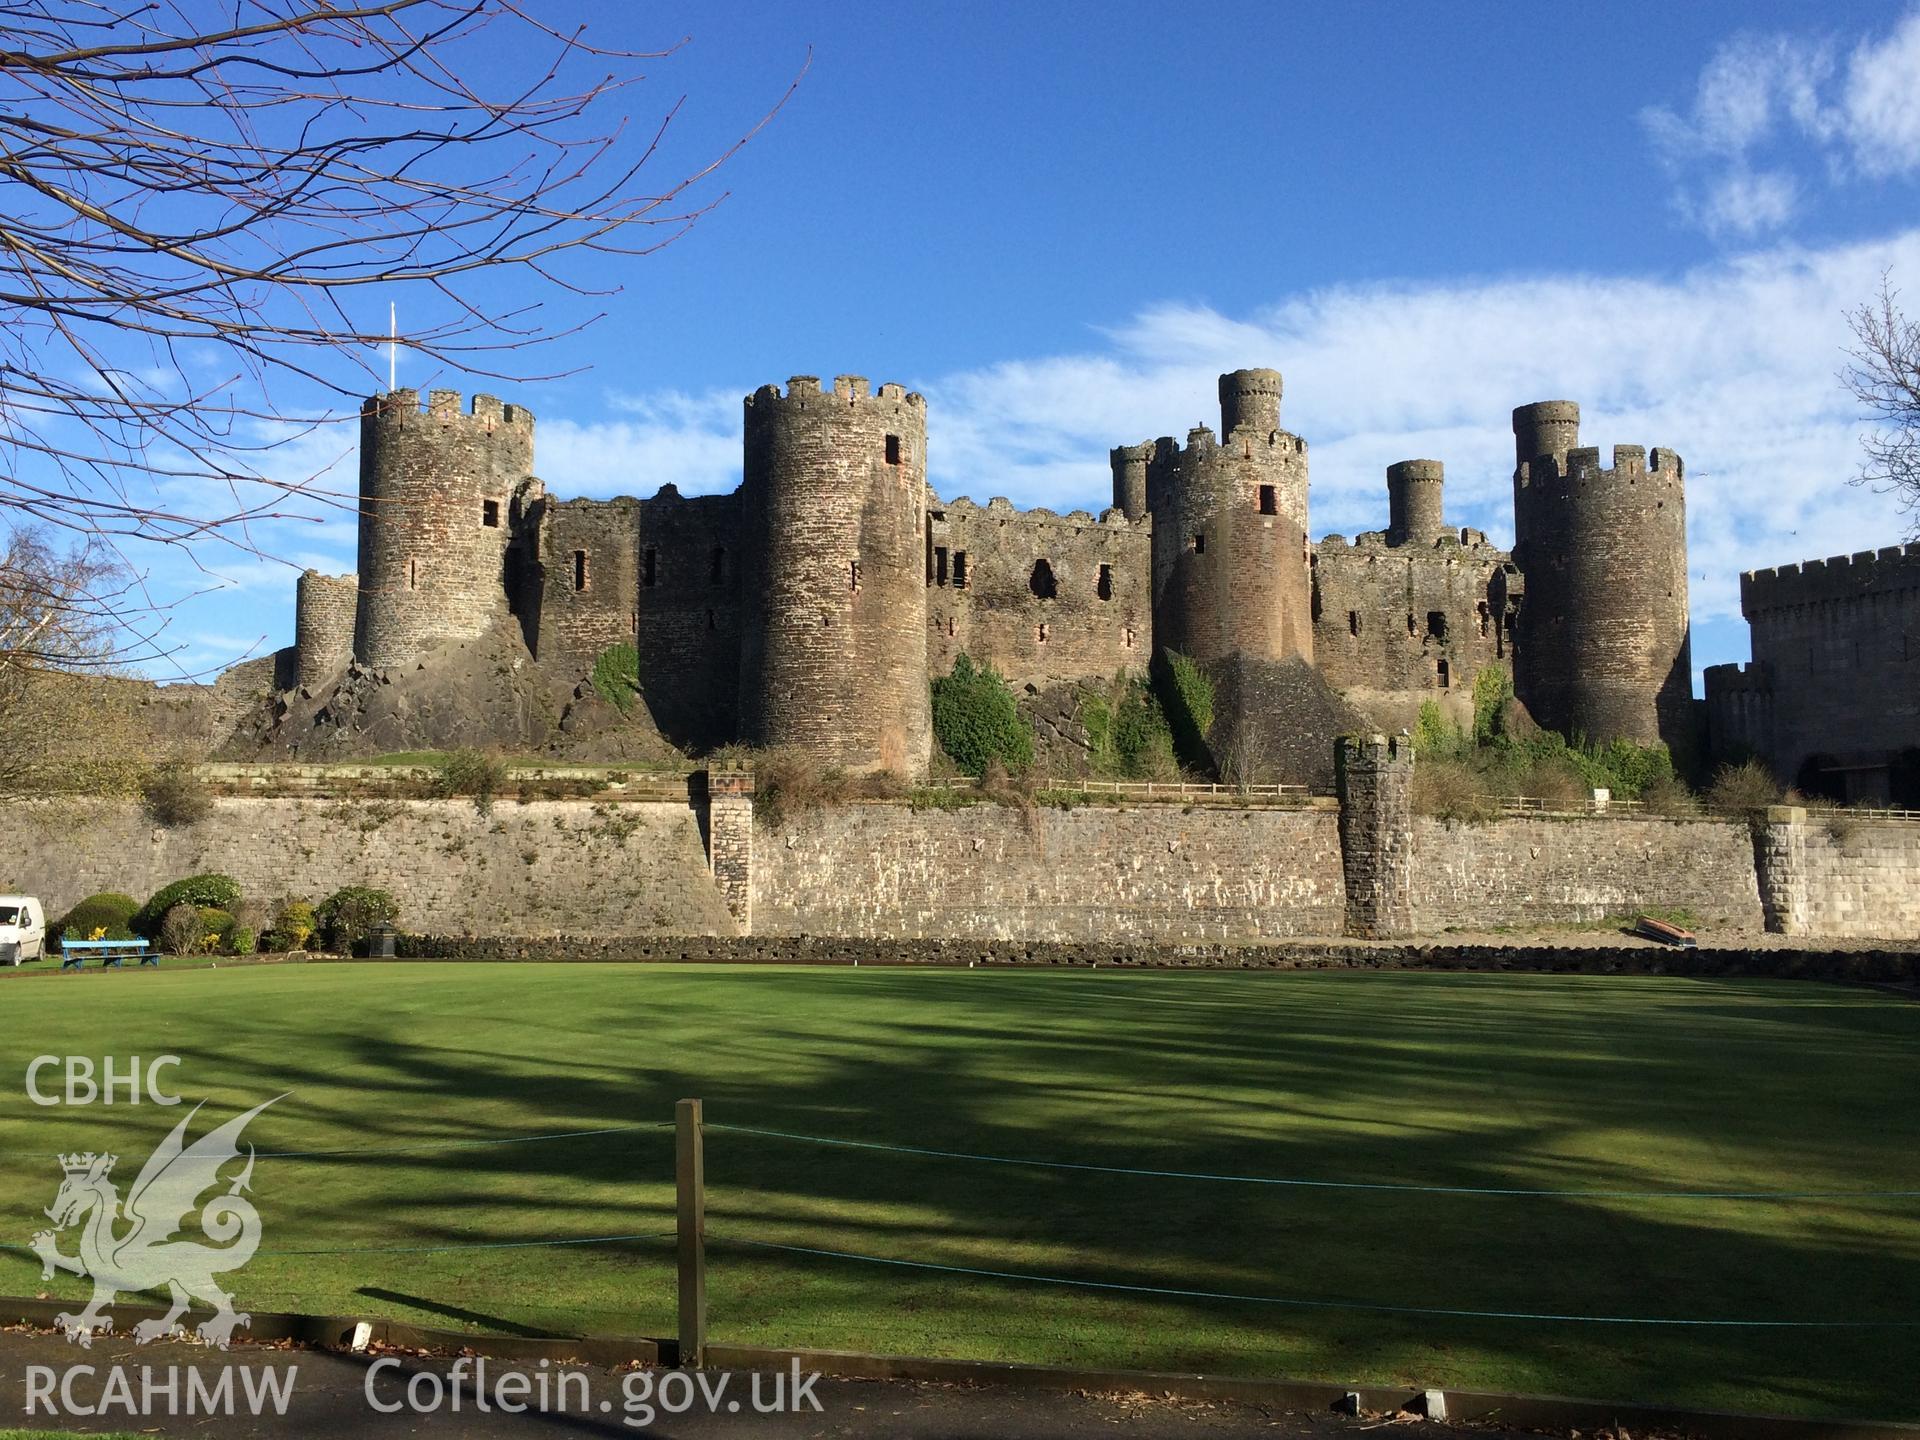 Colour photo showing Conwy  Castle, produced by  Paul R. Davis, 15th March 2017.